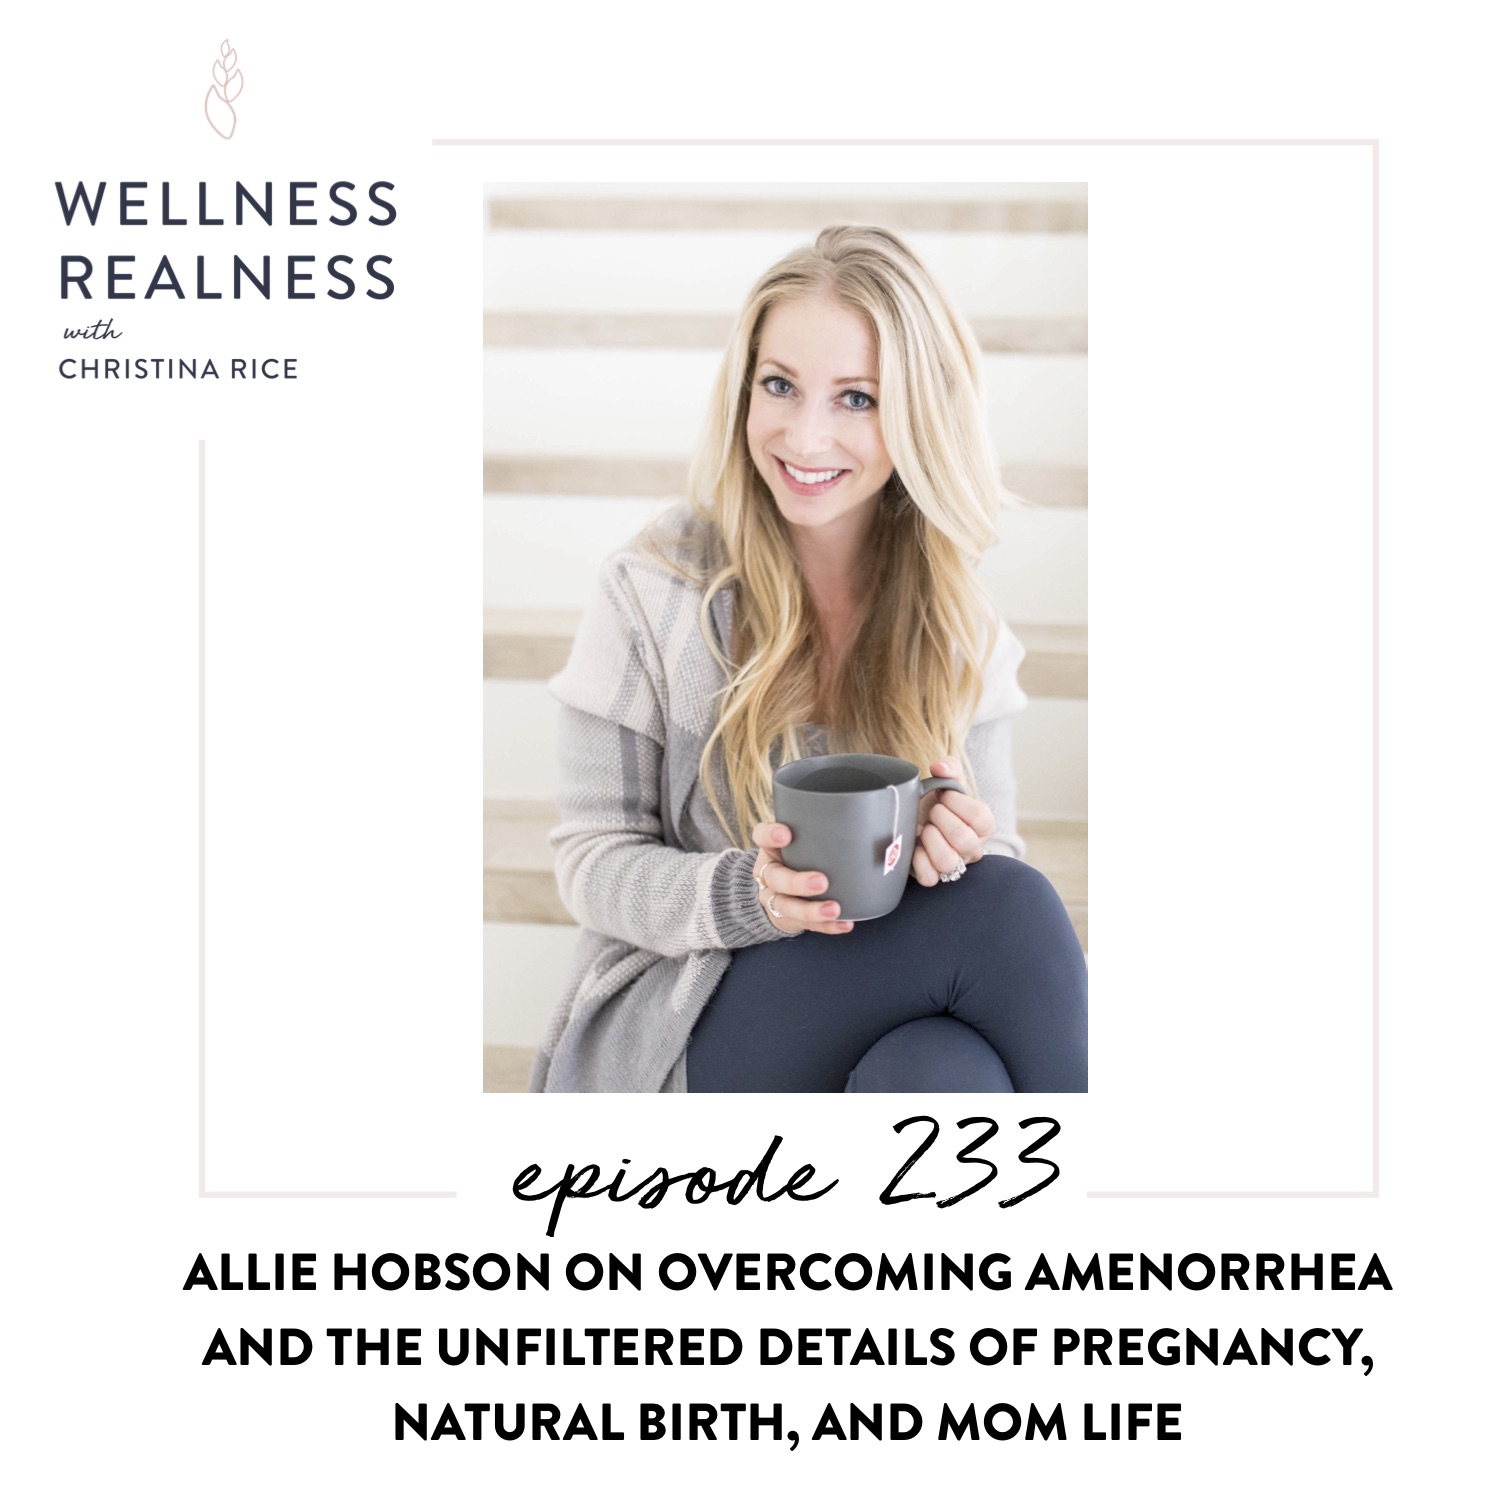 233: Allie Hobson on Overcoming Amenorrhea and the Unfiltered Details of Pregnancy, Natural Birth, and Mom Life